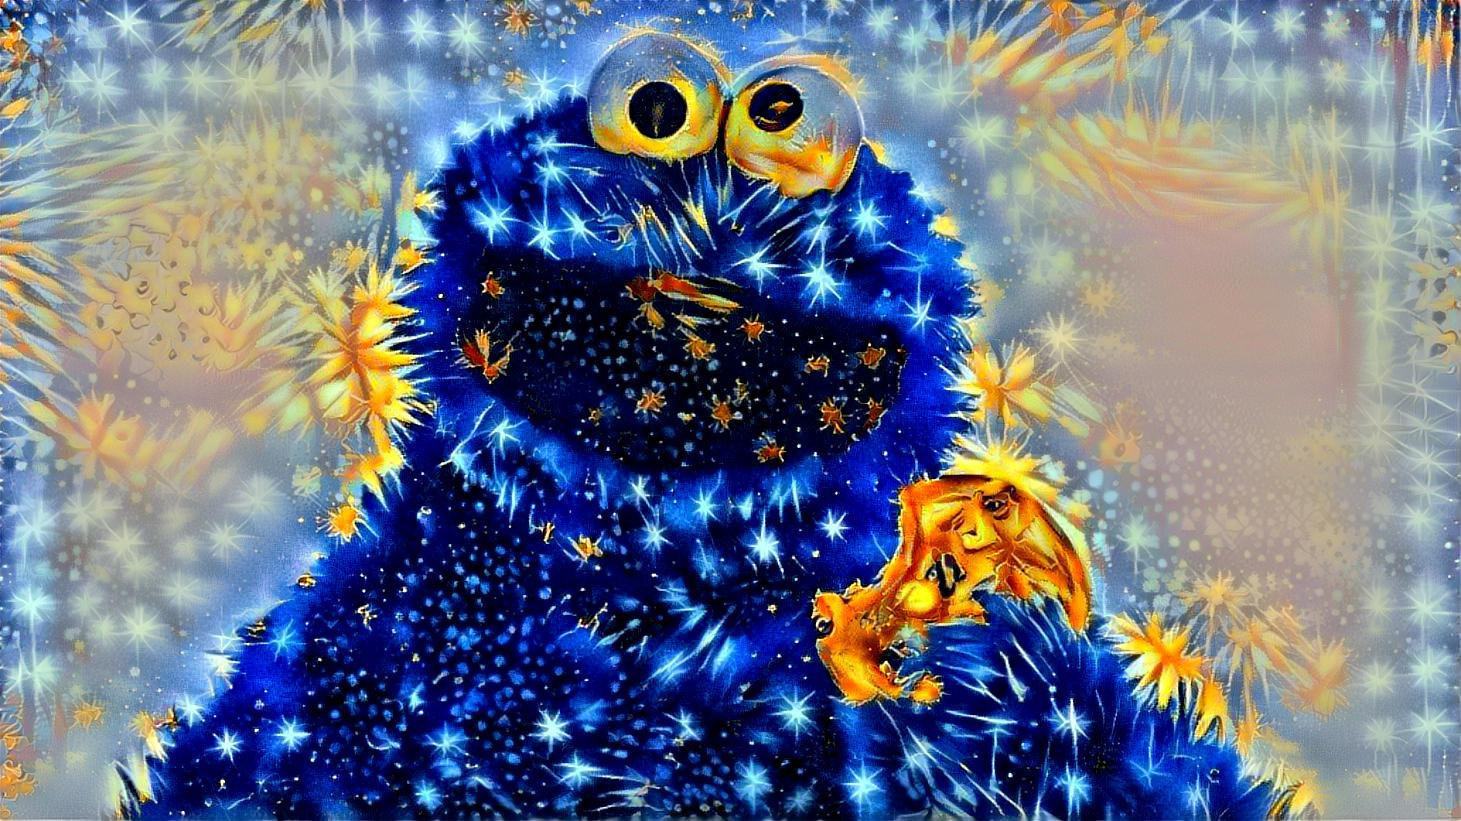 Magic cookie monster